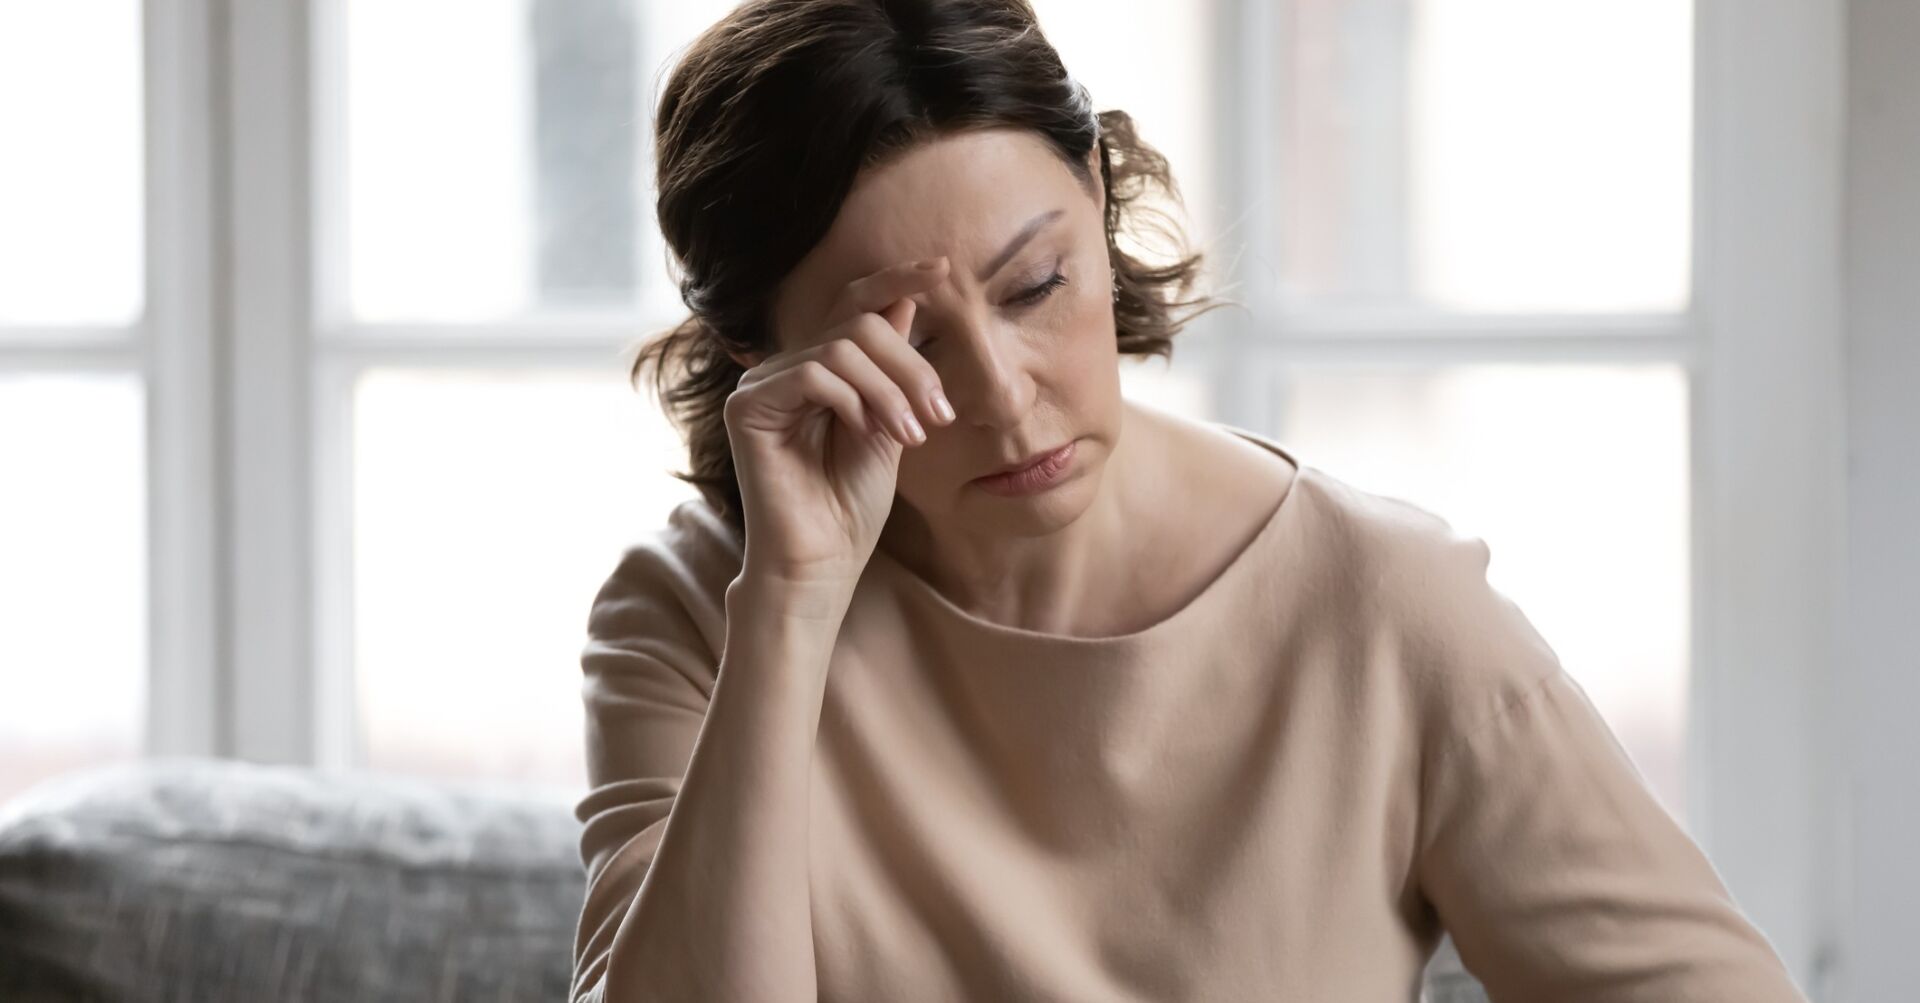 Women in perimenopause have significant increased risk of depression